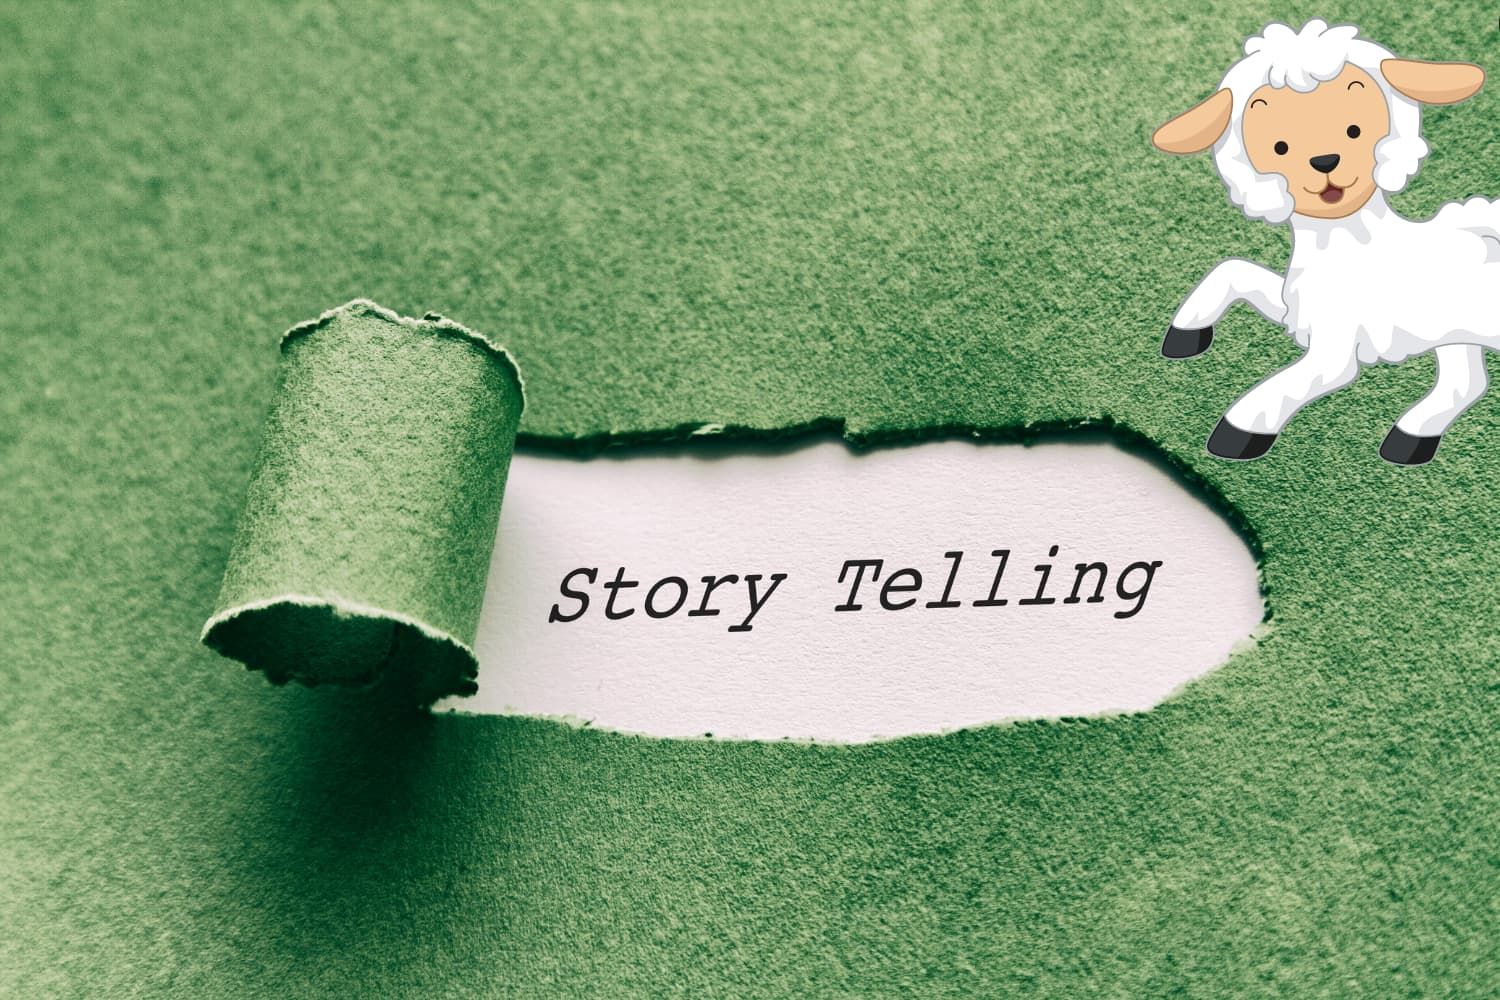 Storytelling%20tips%20-%20NT%20Parable%20of%20the%20lost%20sheep%20-%20Four%20tips%20to%20help%20you%20tell%20the%20story-0b70d295 Helping / being helpful